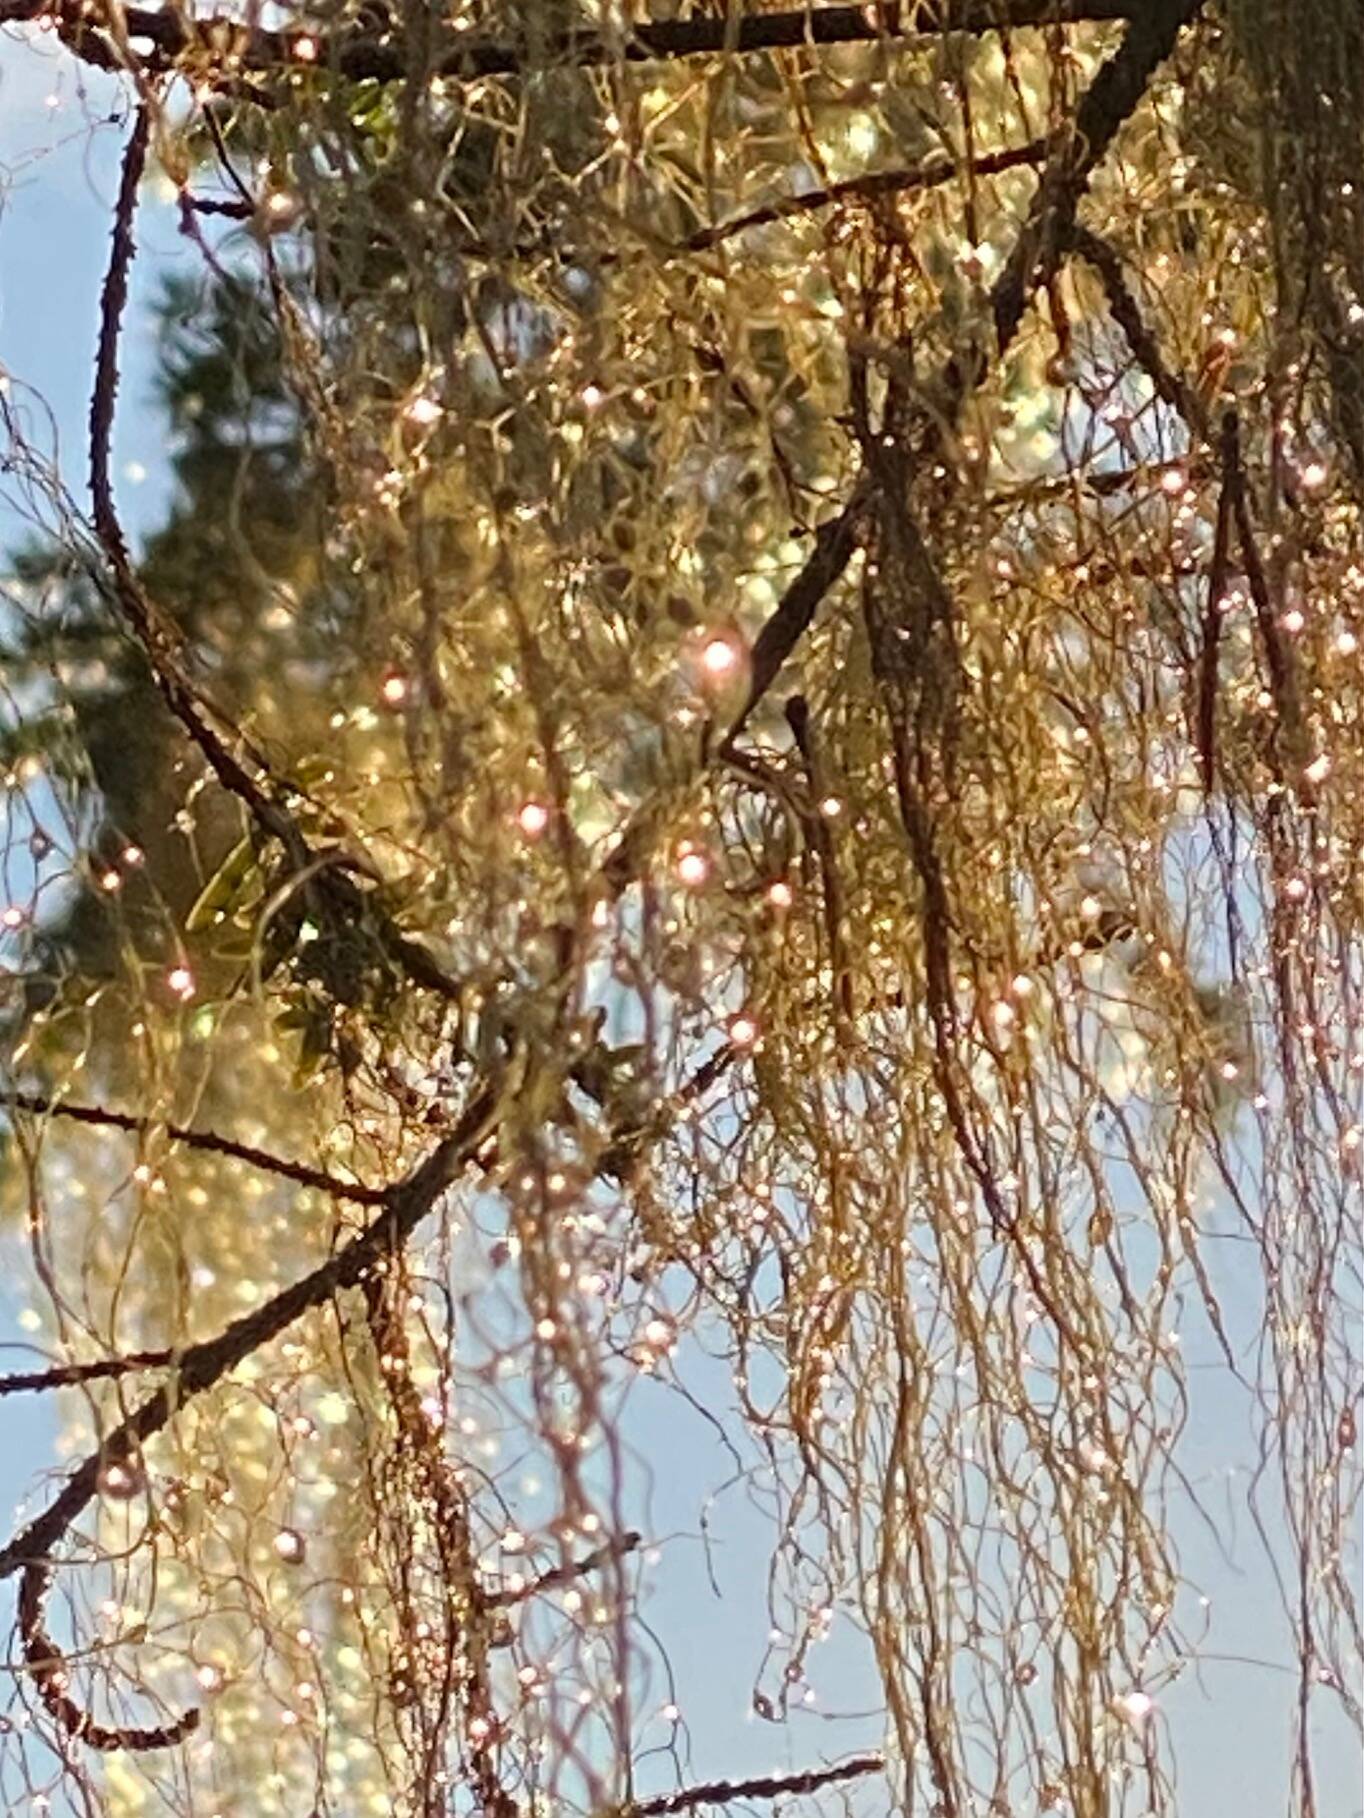 Water droplets on witch’s hair appear as diamonds in the sunlight on this evergreen tree. Boy Scout Beach. ourtesy Photo / Denise Carroll)